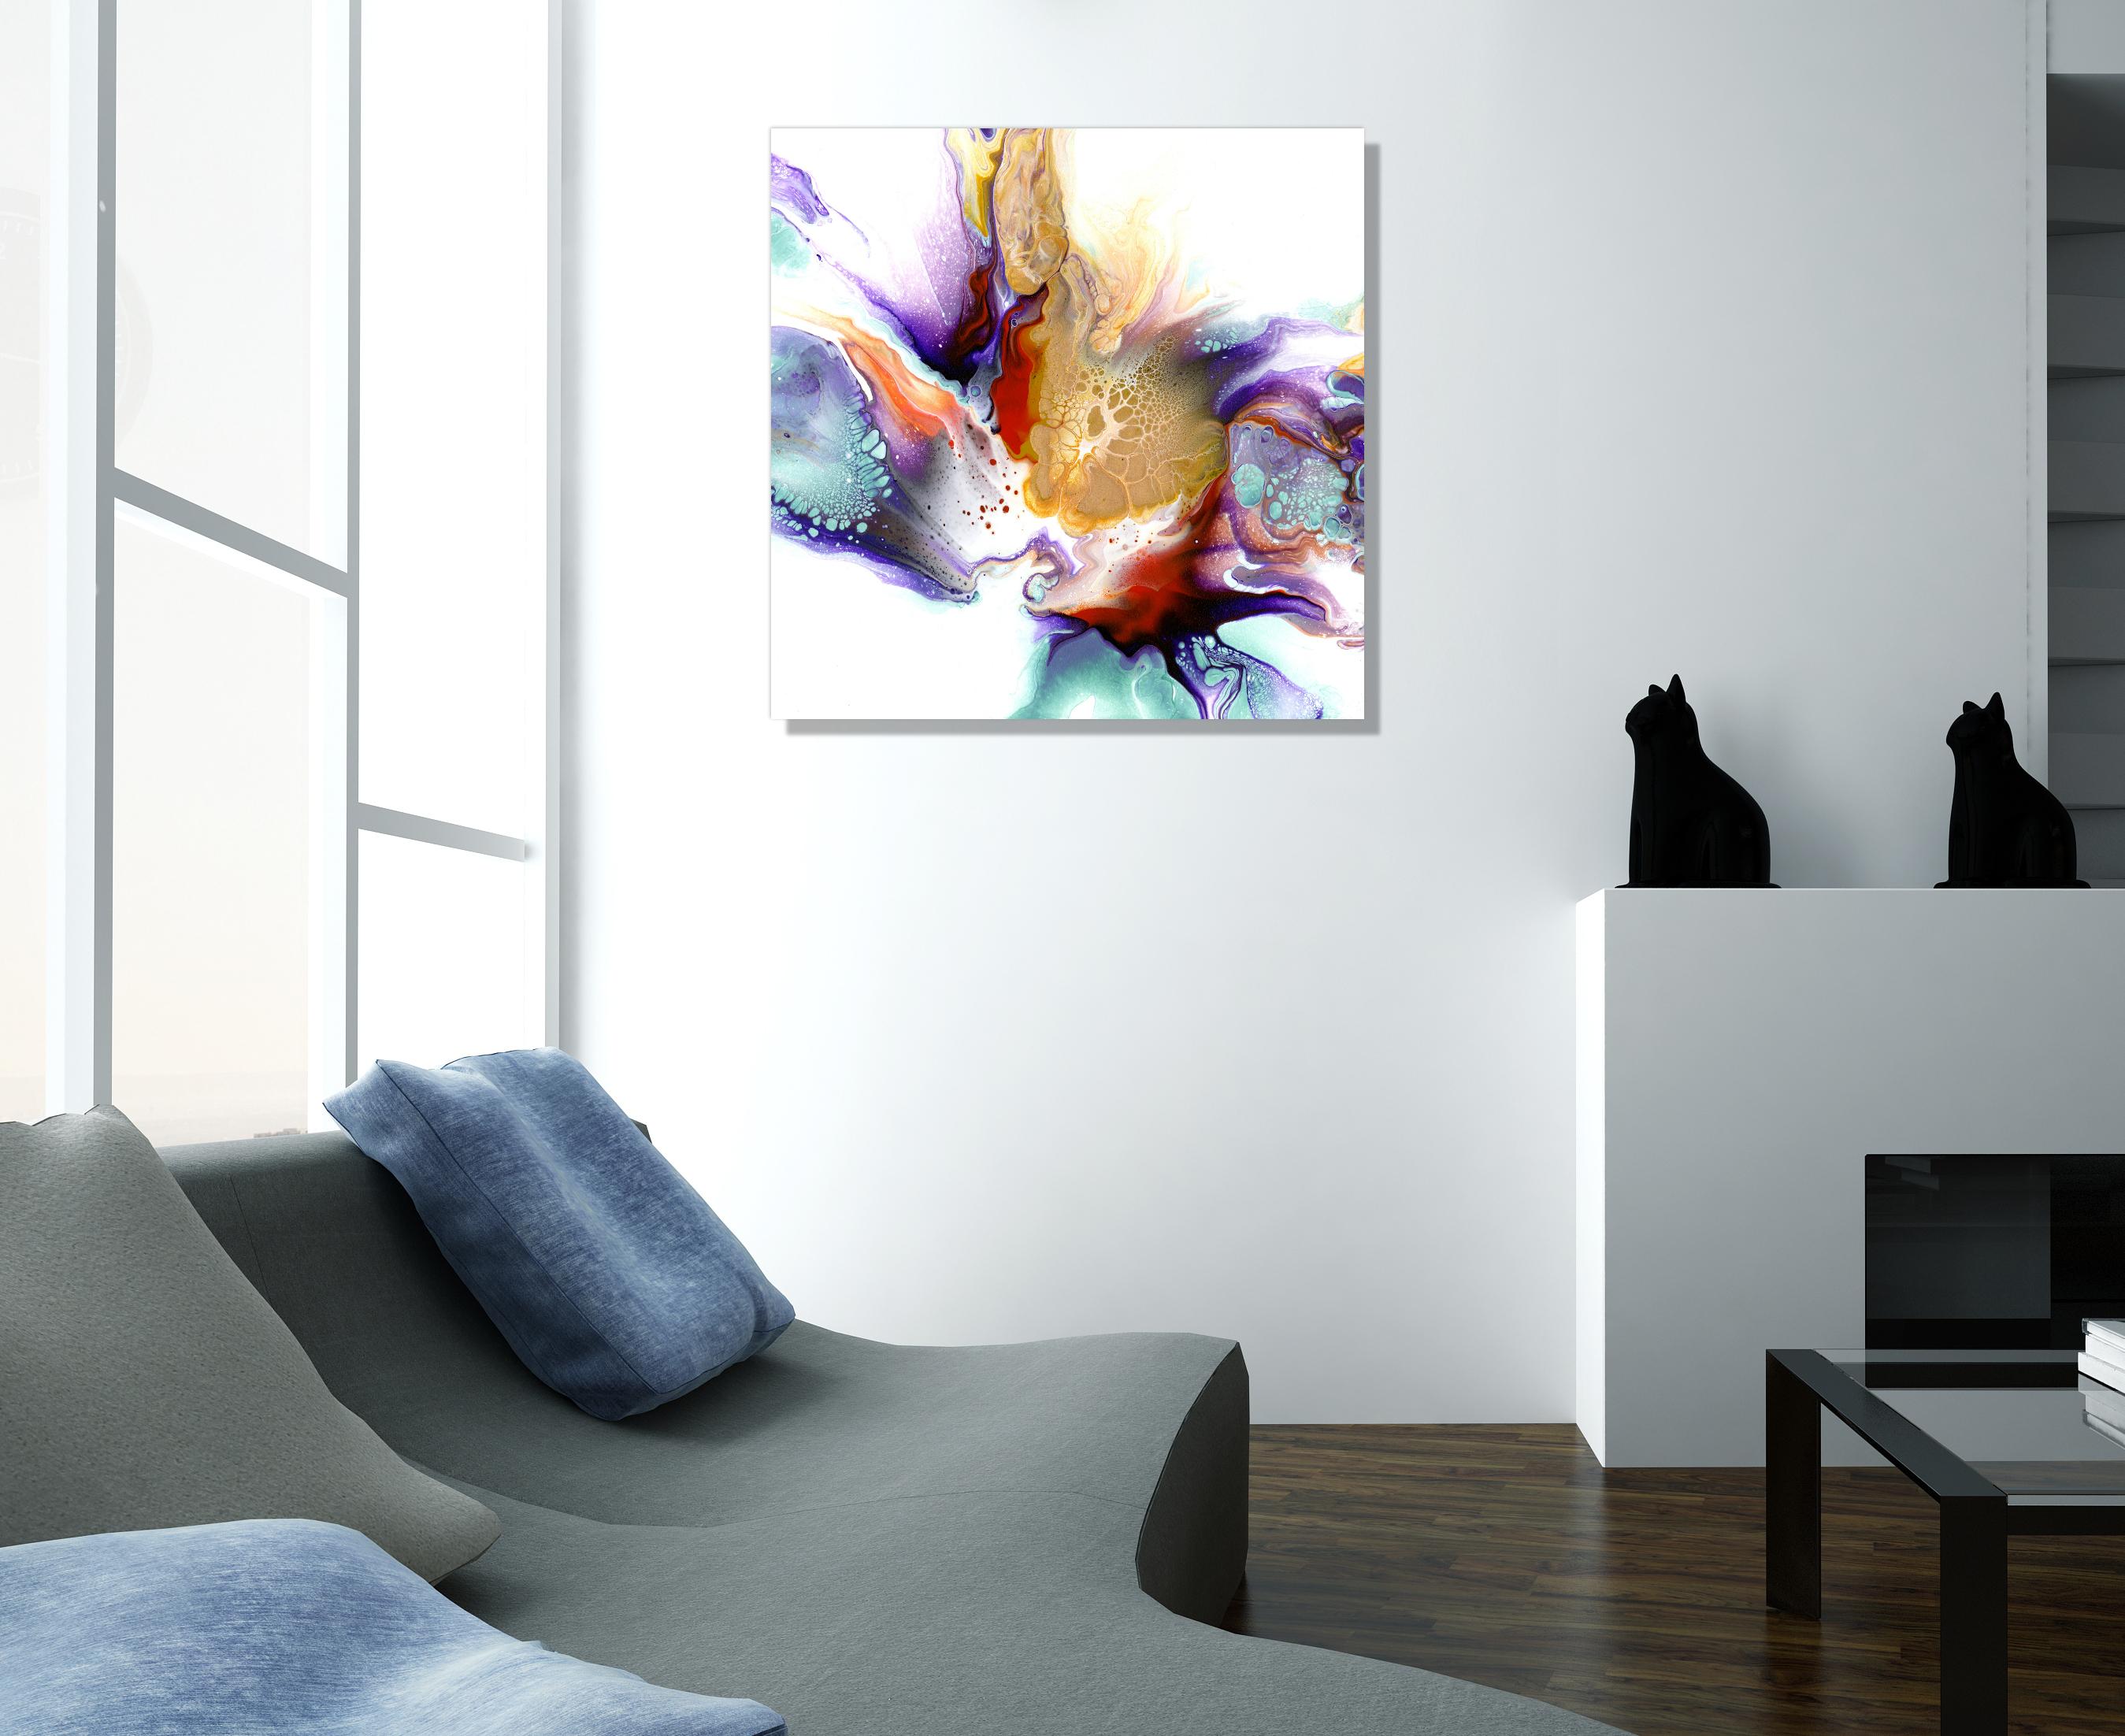 This ultra-modern painting piece boasts explosive colors of orange, blue, purple, red, gold, and laced with beautiful details throughout. Printed on lightweight metal composite, your artwork comes ready to hang. The automotive high-gloss clear coat